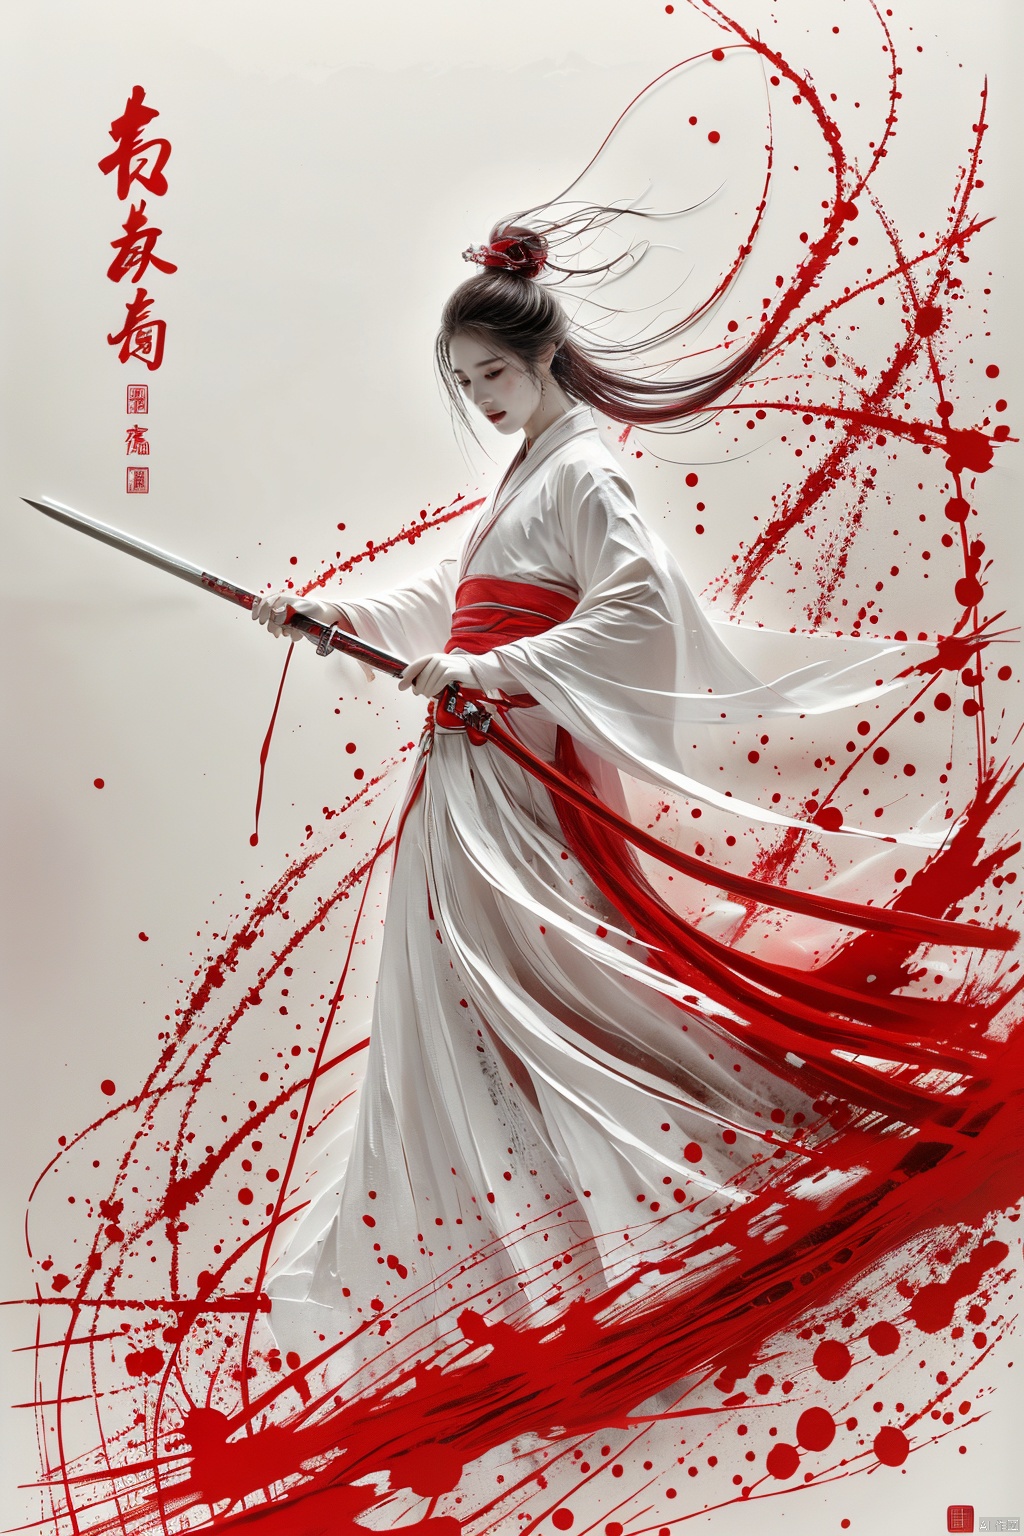  a girl, smwuxia,chinese text,blood, weapon:sw,blood splatter,motion blur,text,full body,hanfu, looking,